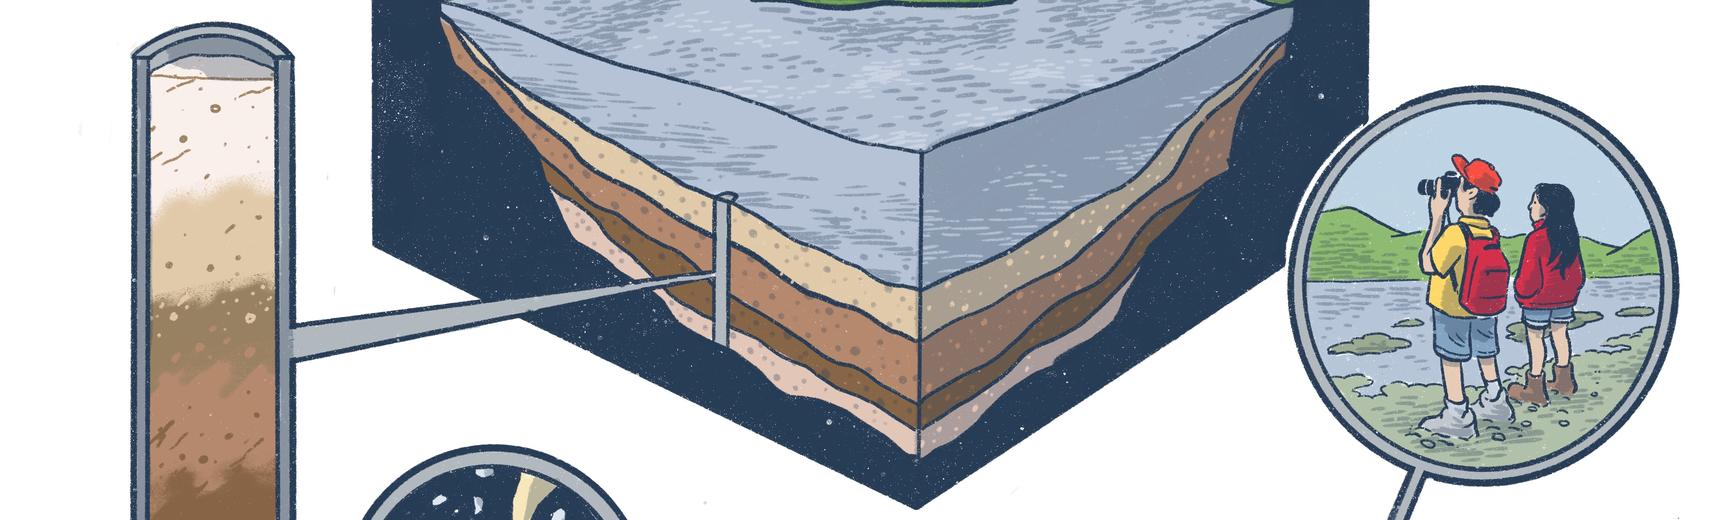 A cross-section of a lake showing layers of sediment on the lake bottom. Connected to a close-up of the sediment layers are an image of a volcano, a museum, and visitors to the site